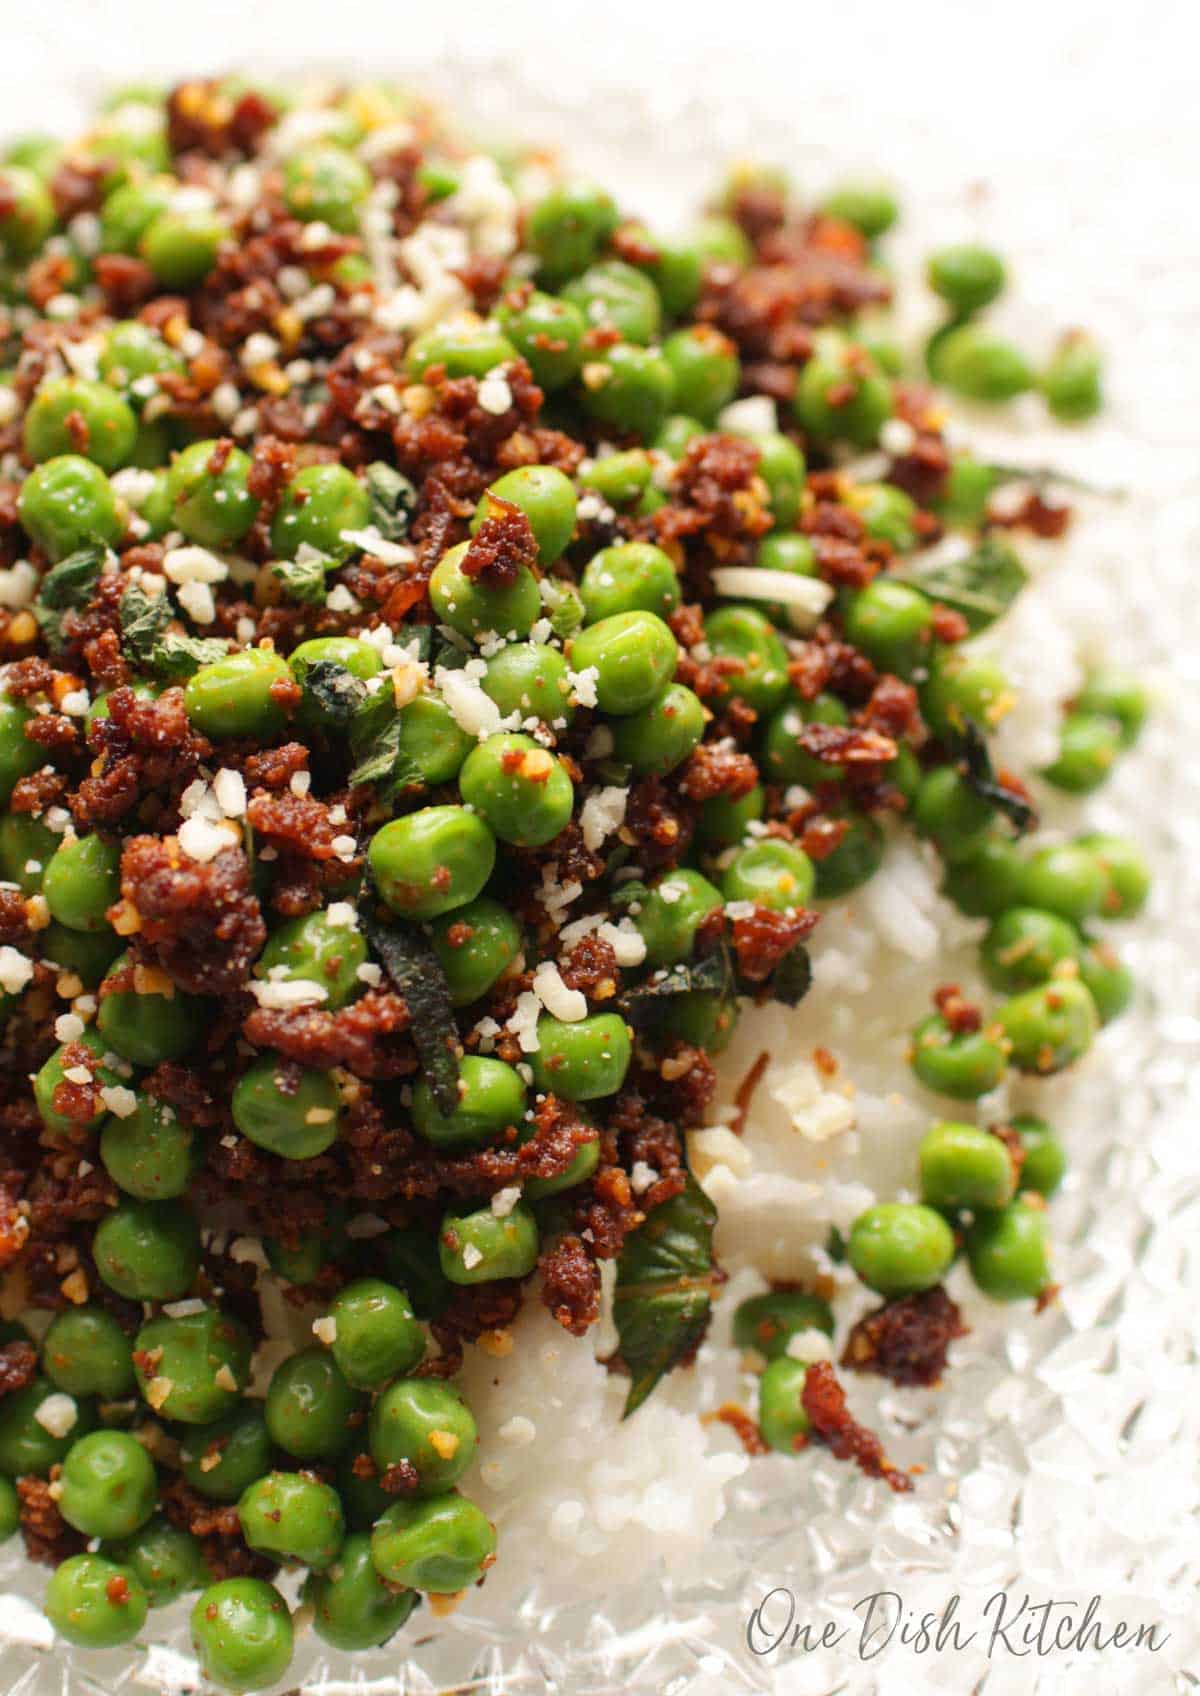 Closeup of peas with chorizo, cotija cheese crumbles, and mint leaves over white rice on a clear glass plate.